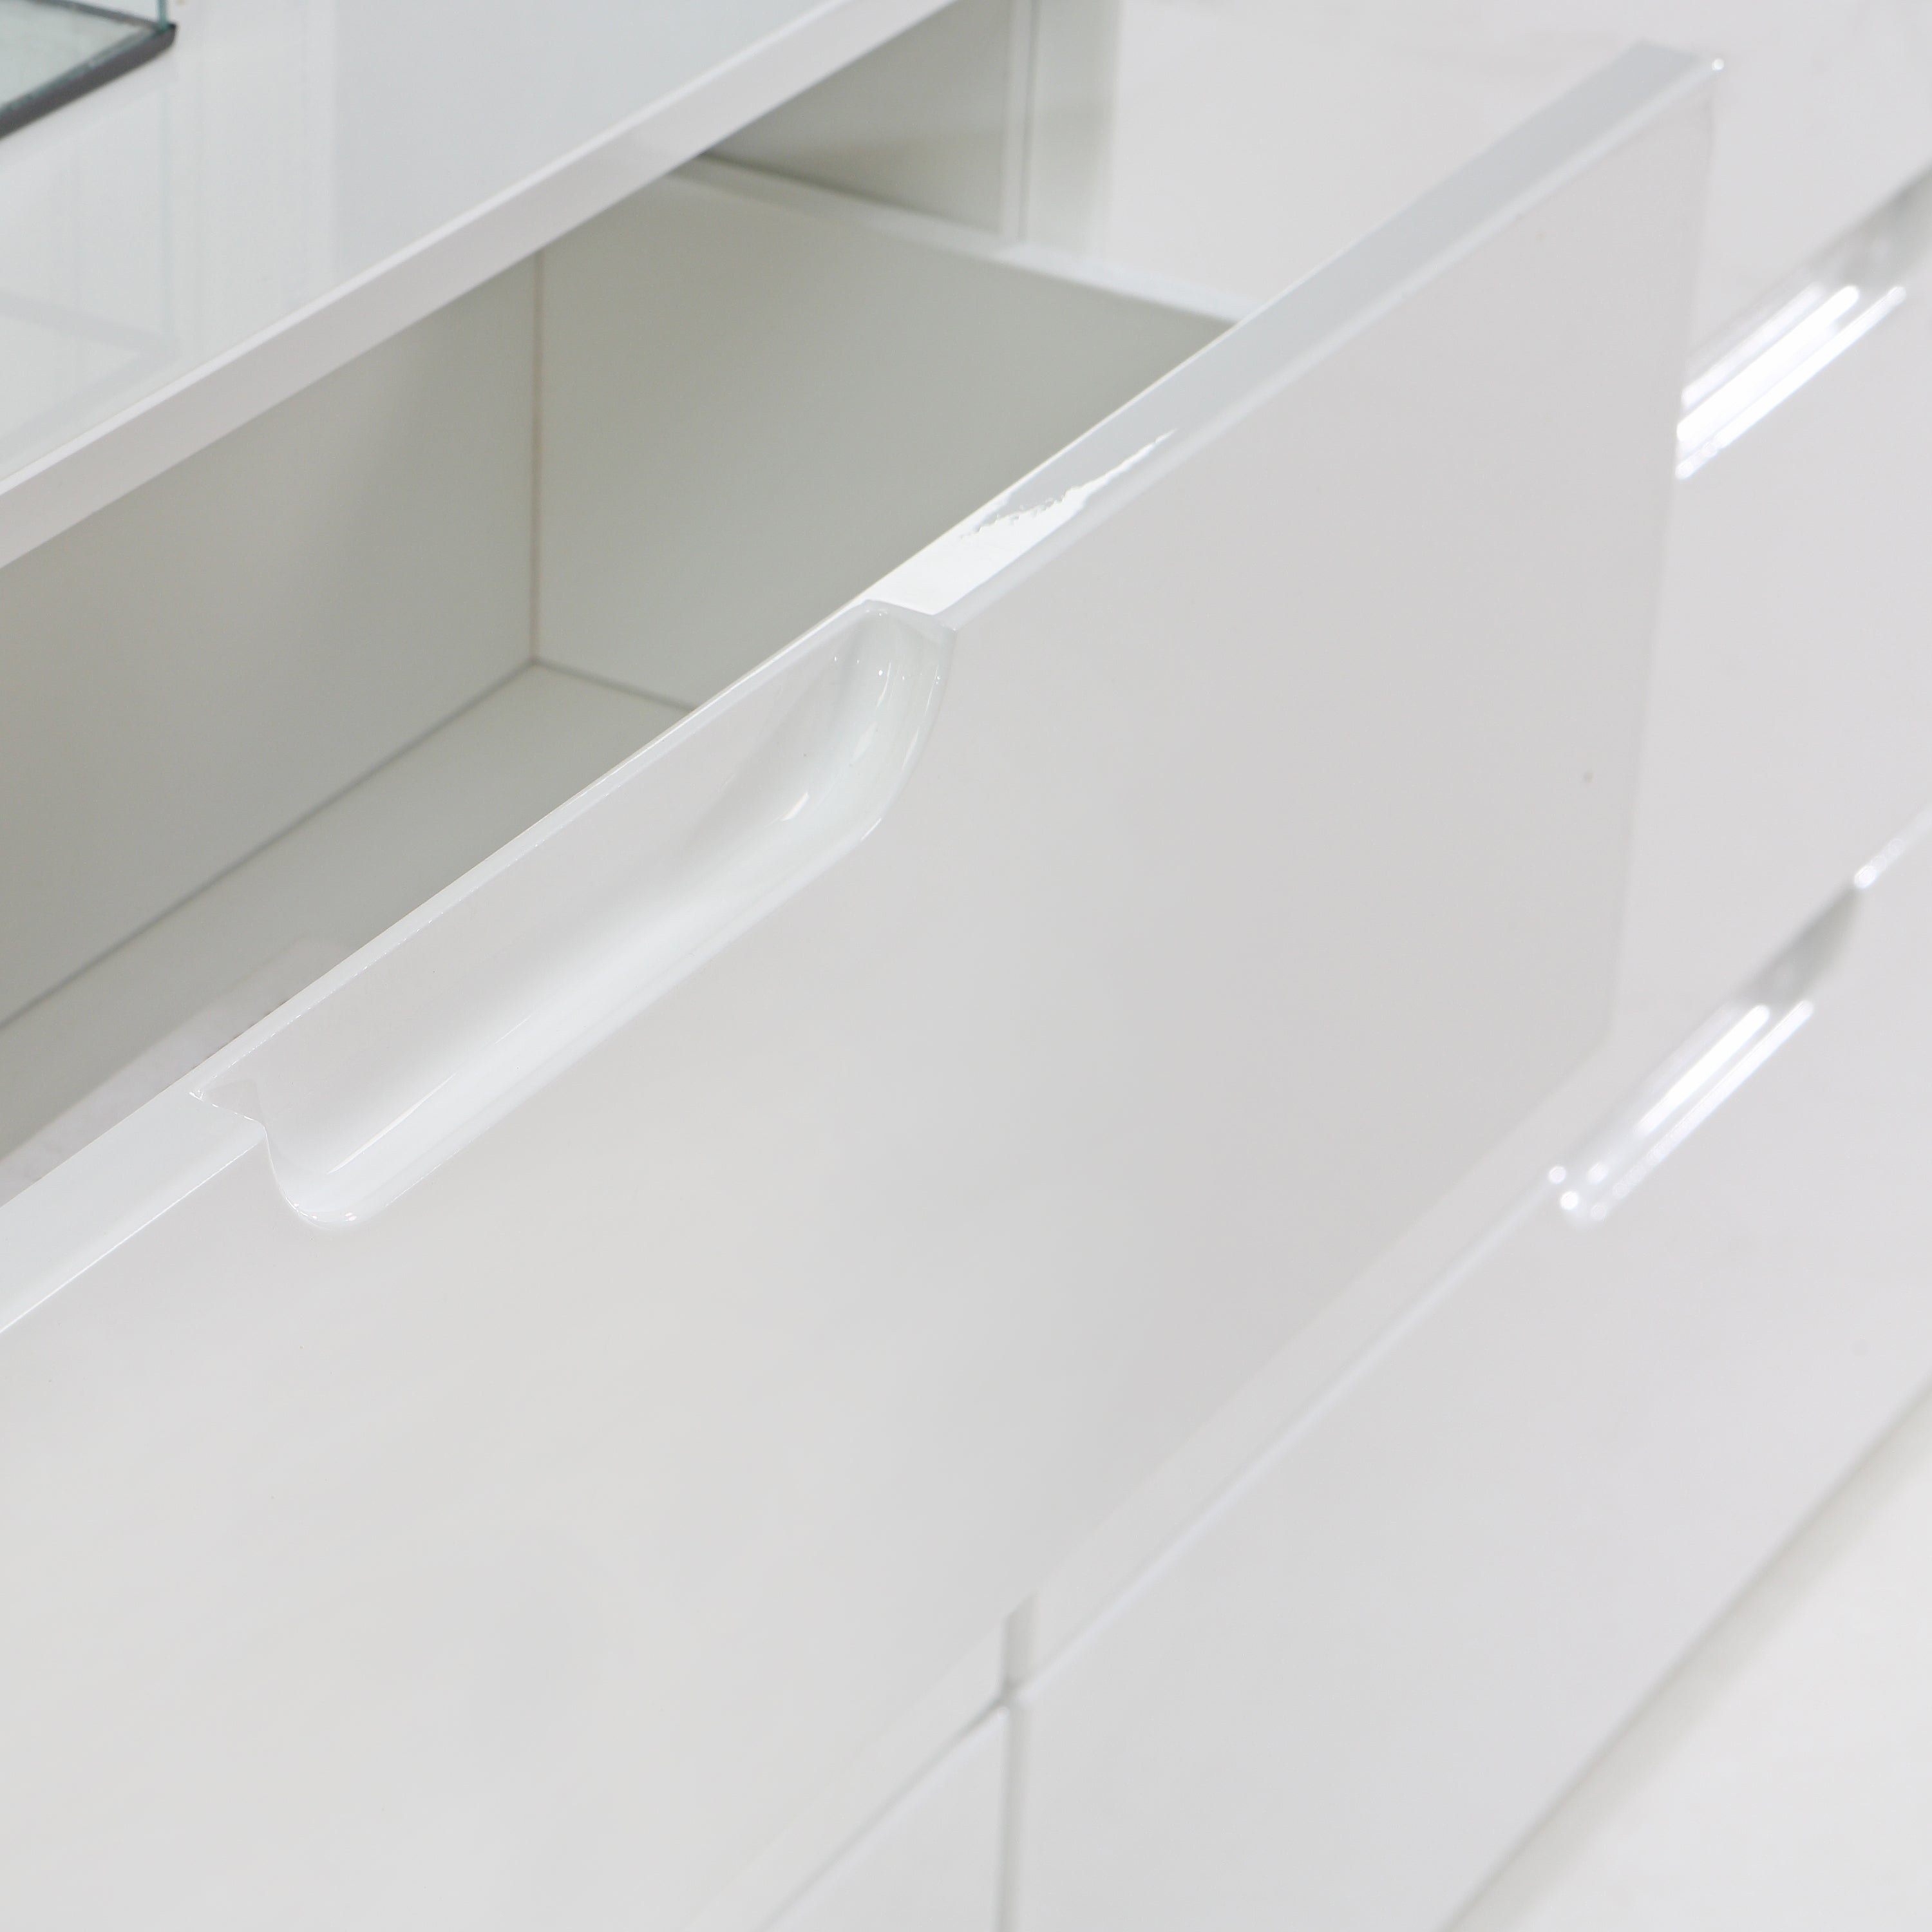 Sienna Abstract Chest of in White/White High Gloss